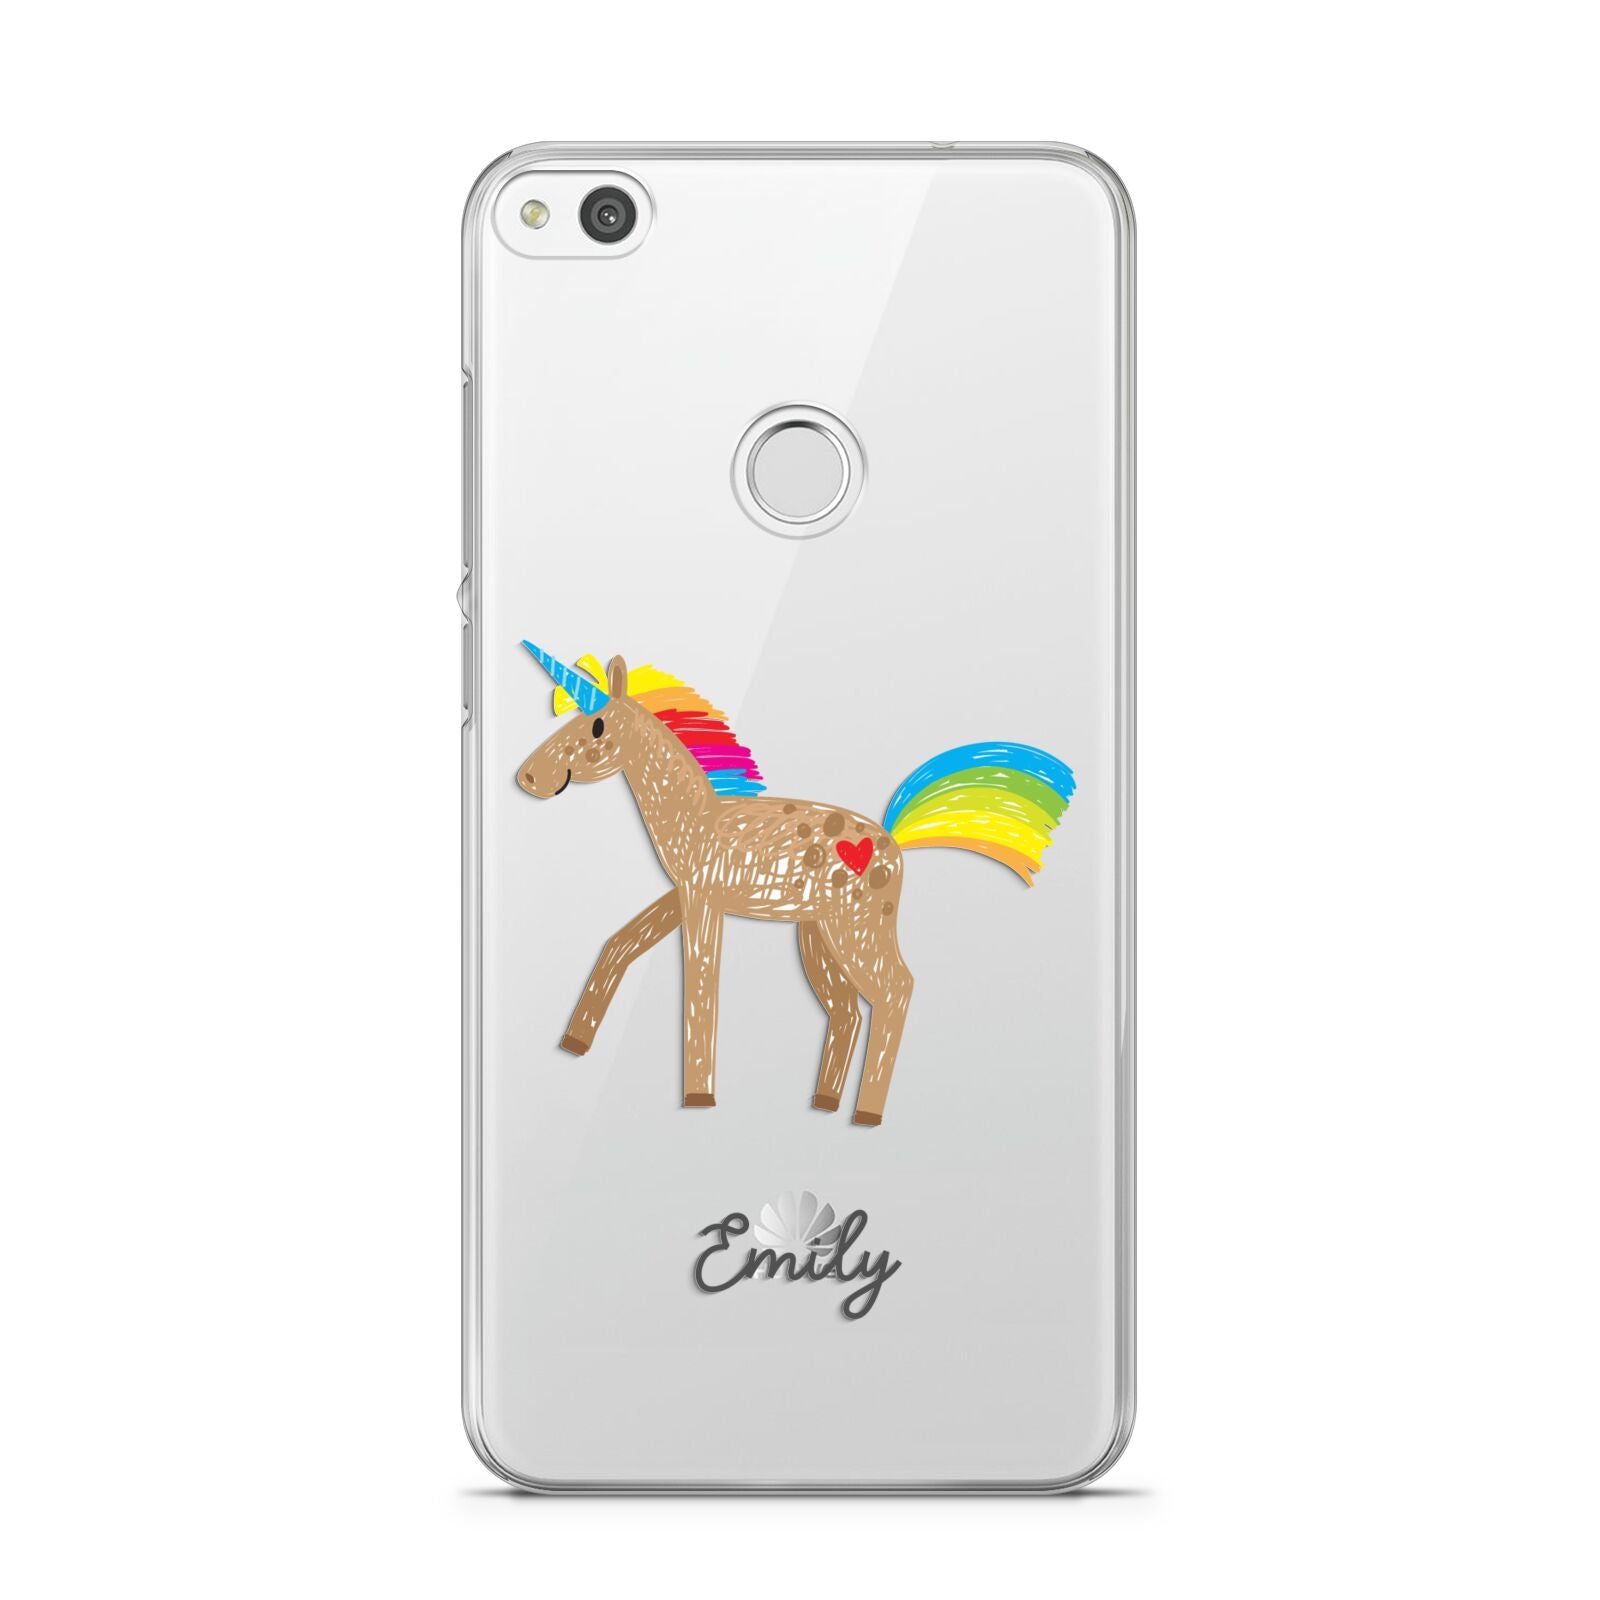 Personalised Unicorn with Name Huawei P8 Lite Case